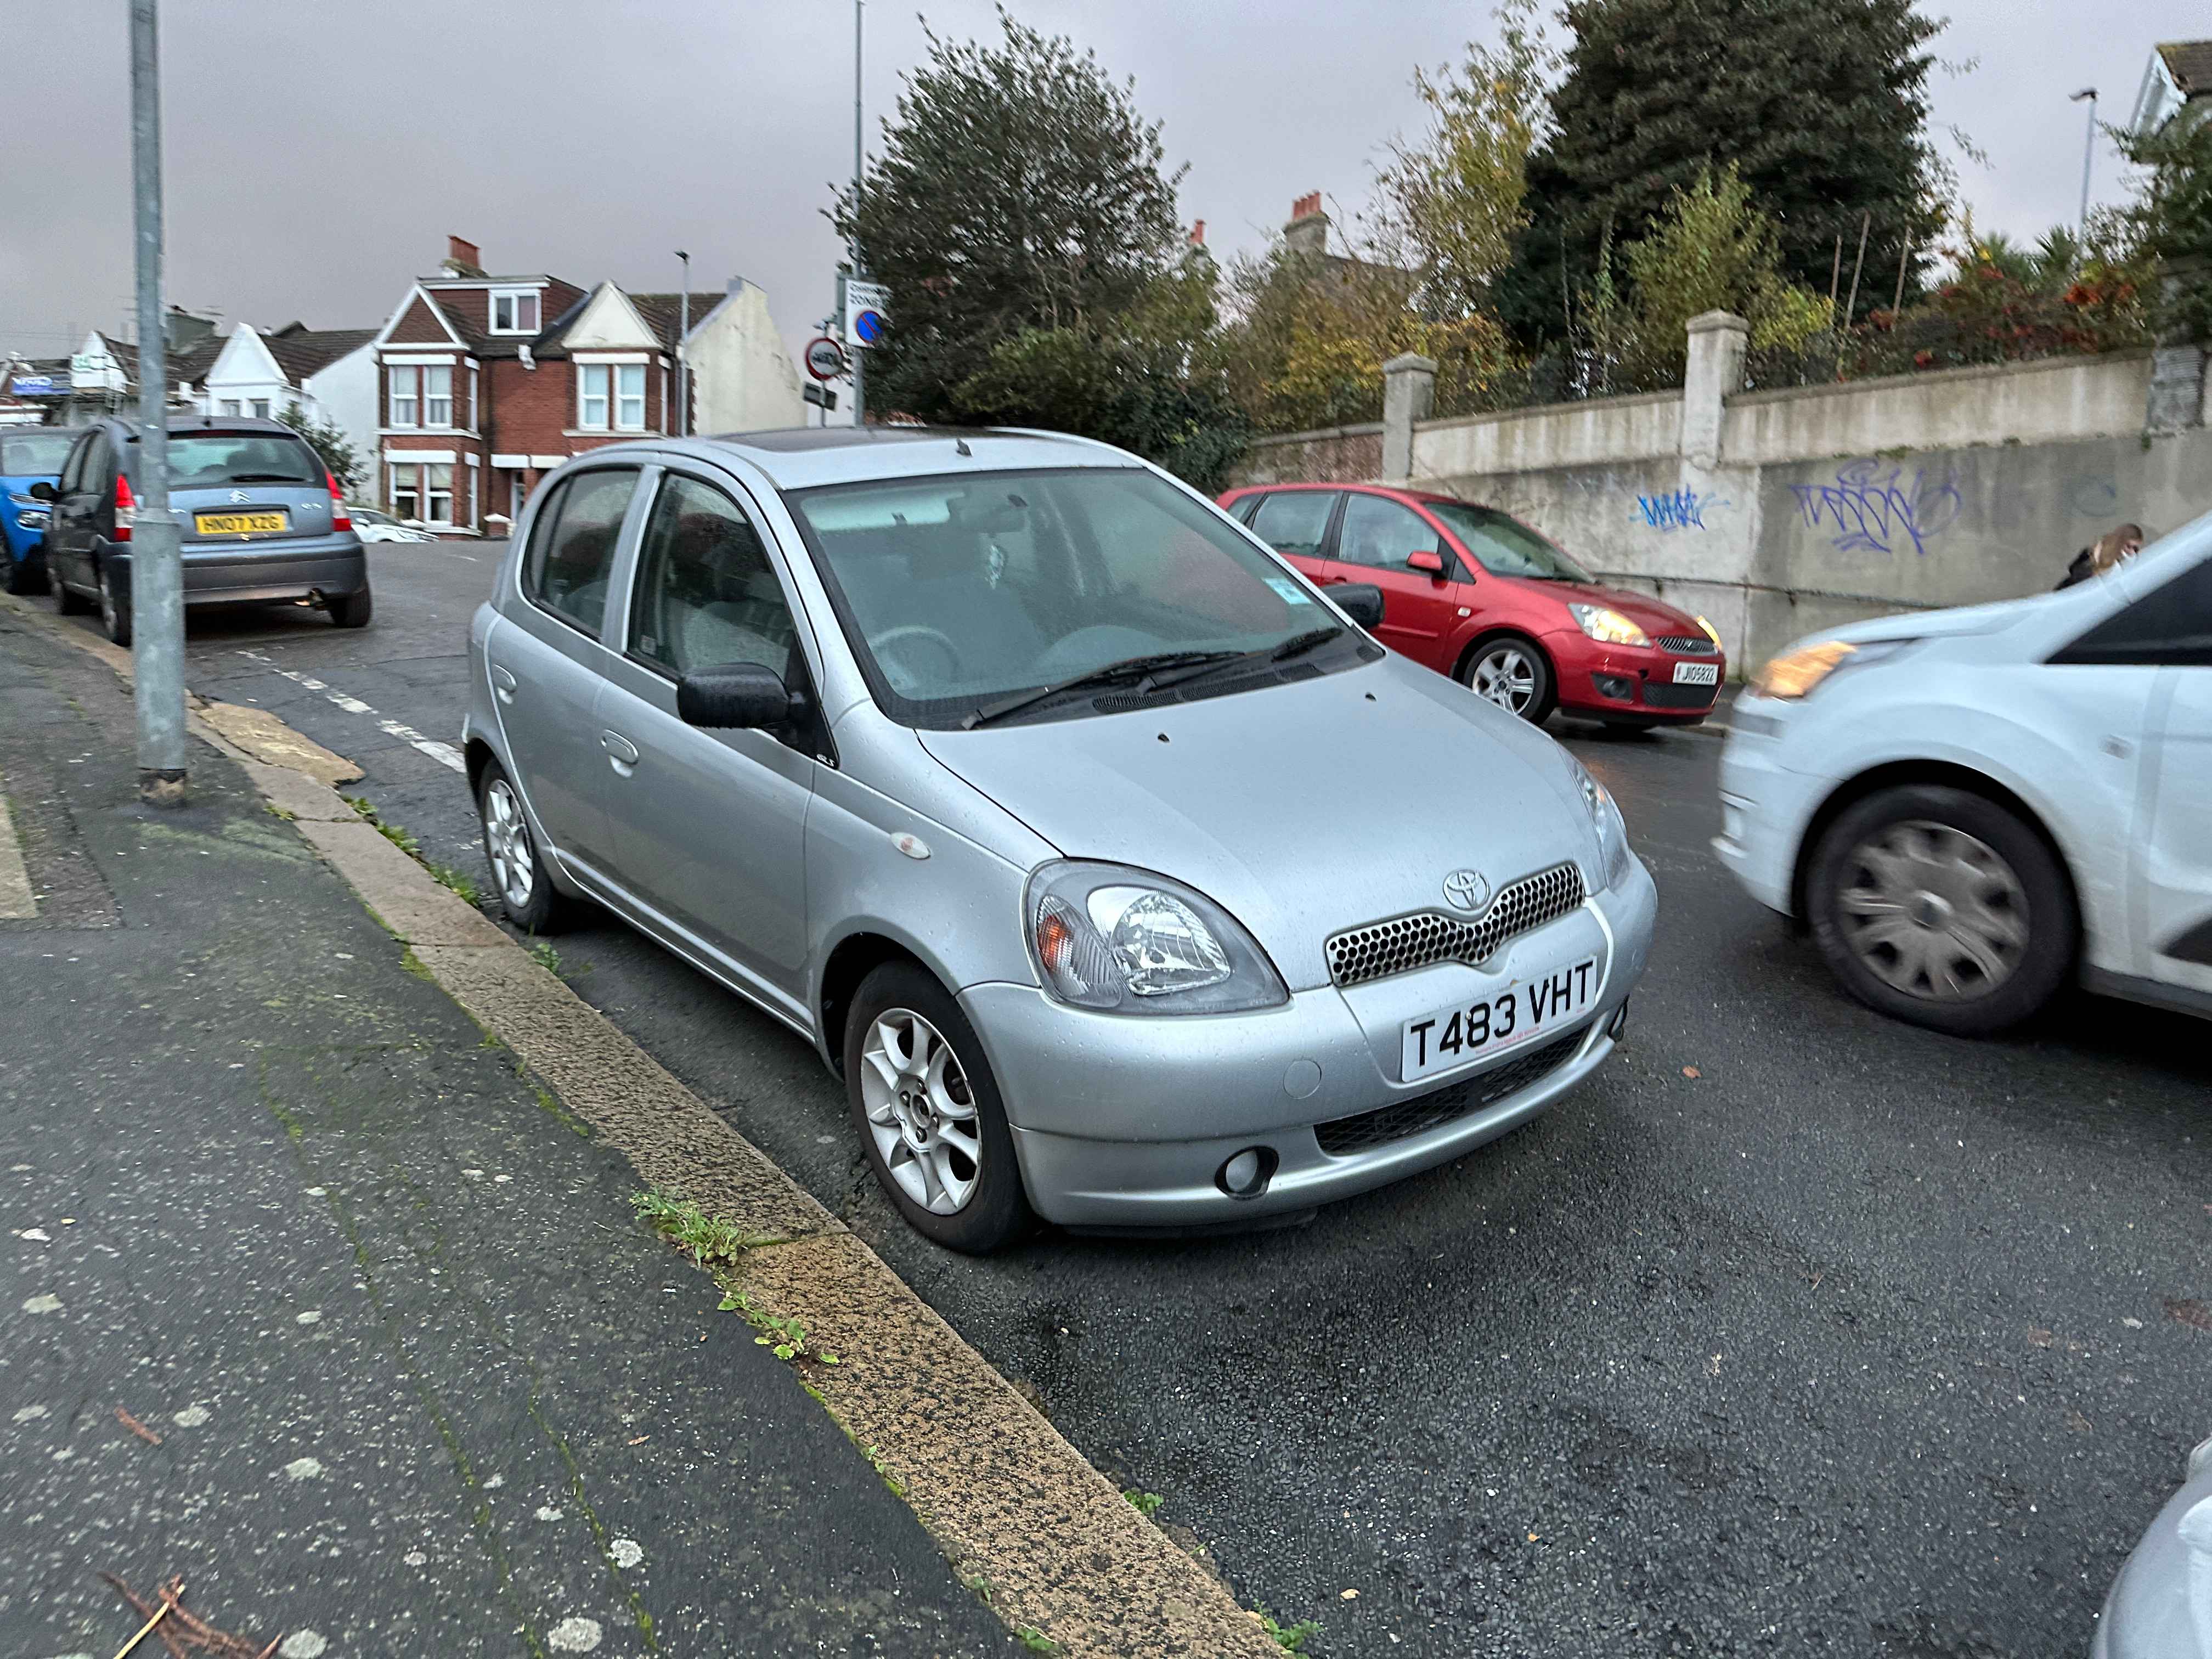 Photograph of T483 VHT - a Silver Toyota Yaris parked in Hollingdean by a non-resident. The eleventh of fourteen photographs supplied by the residents of Hollingdean.